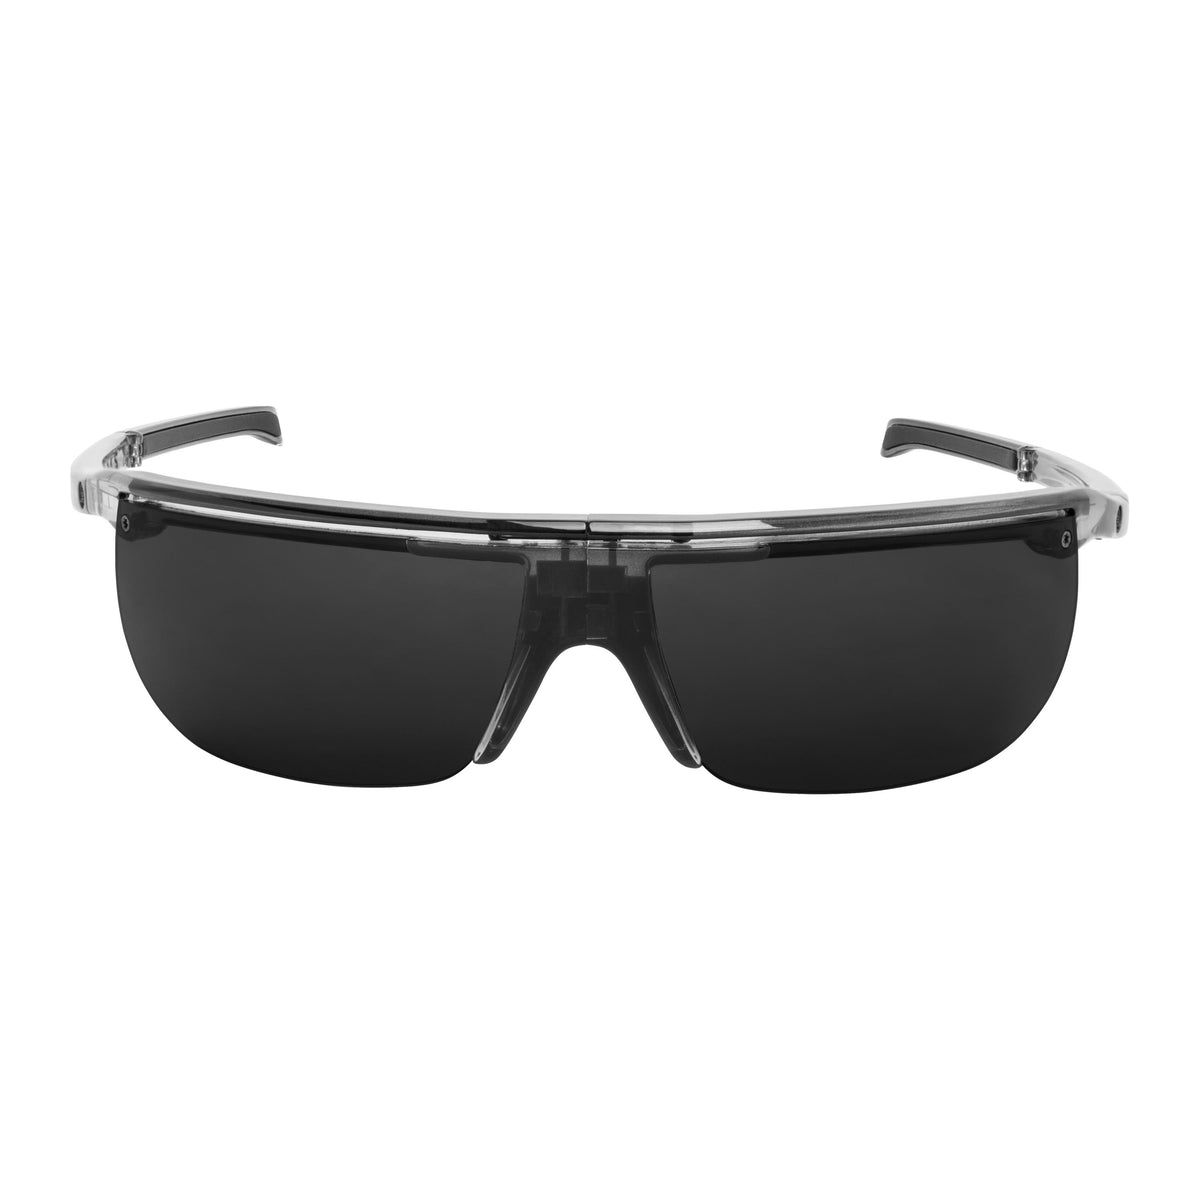 Popticals, Premium Compact Sunglasses, PopArt, 030030-SFGP, Polarized Sunglasses, Gloss Smoke/Clear Crystal, Gray Lenses, Front View